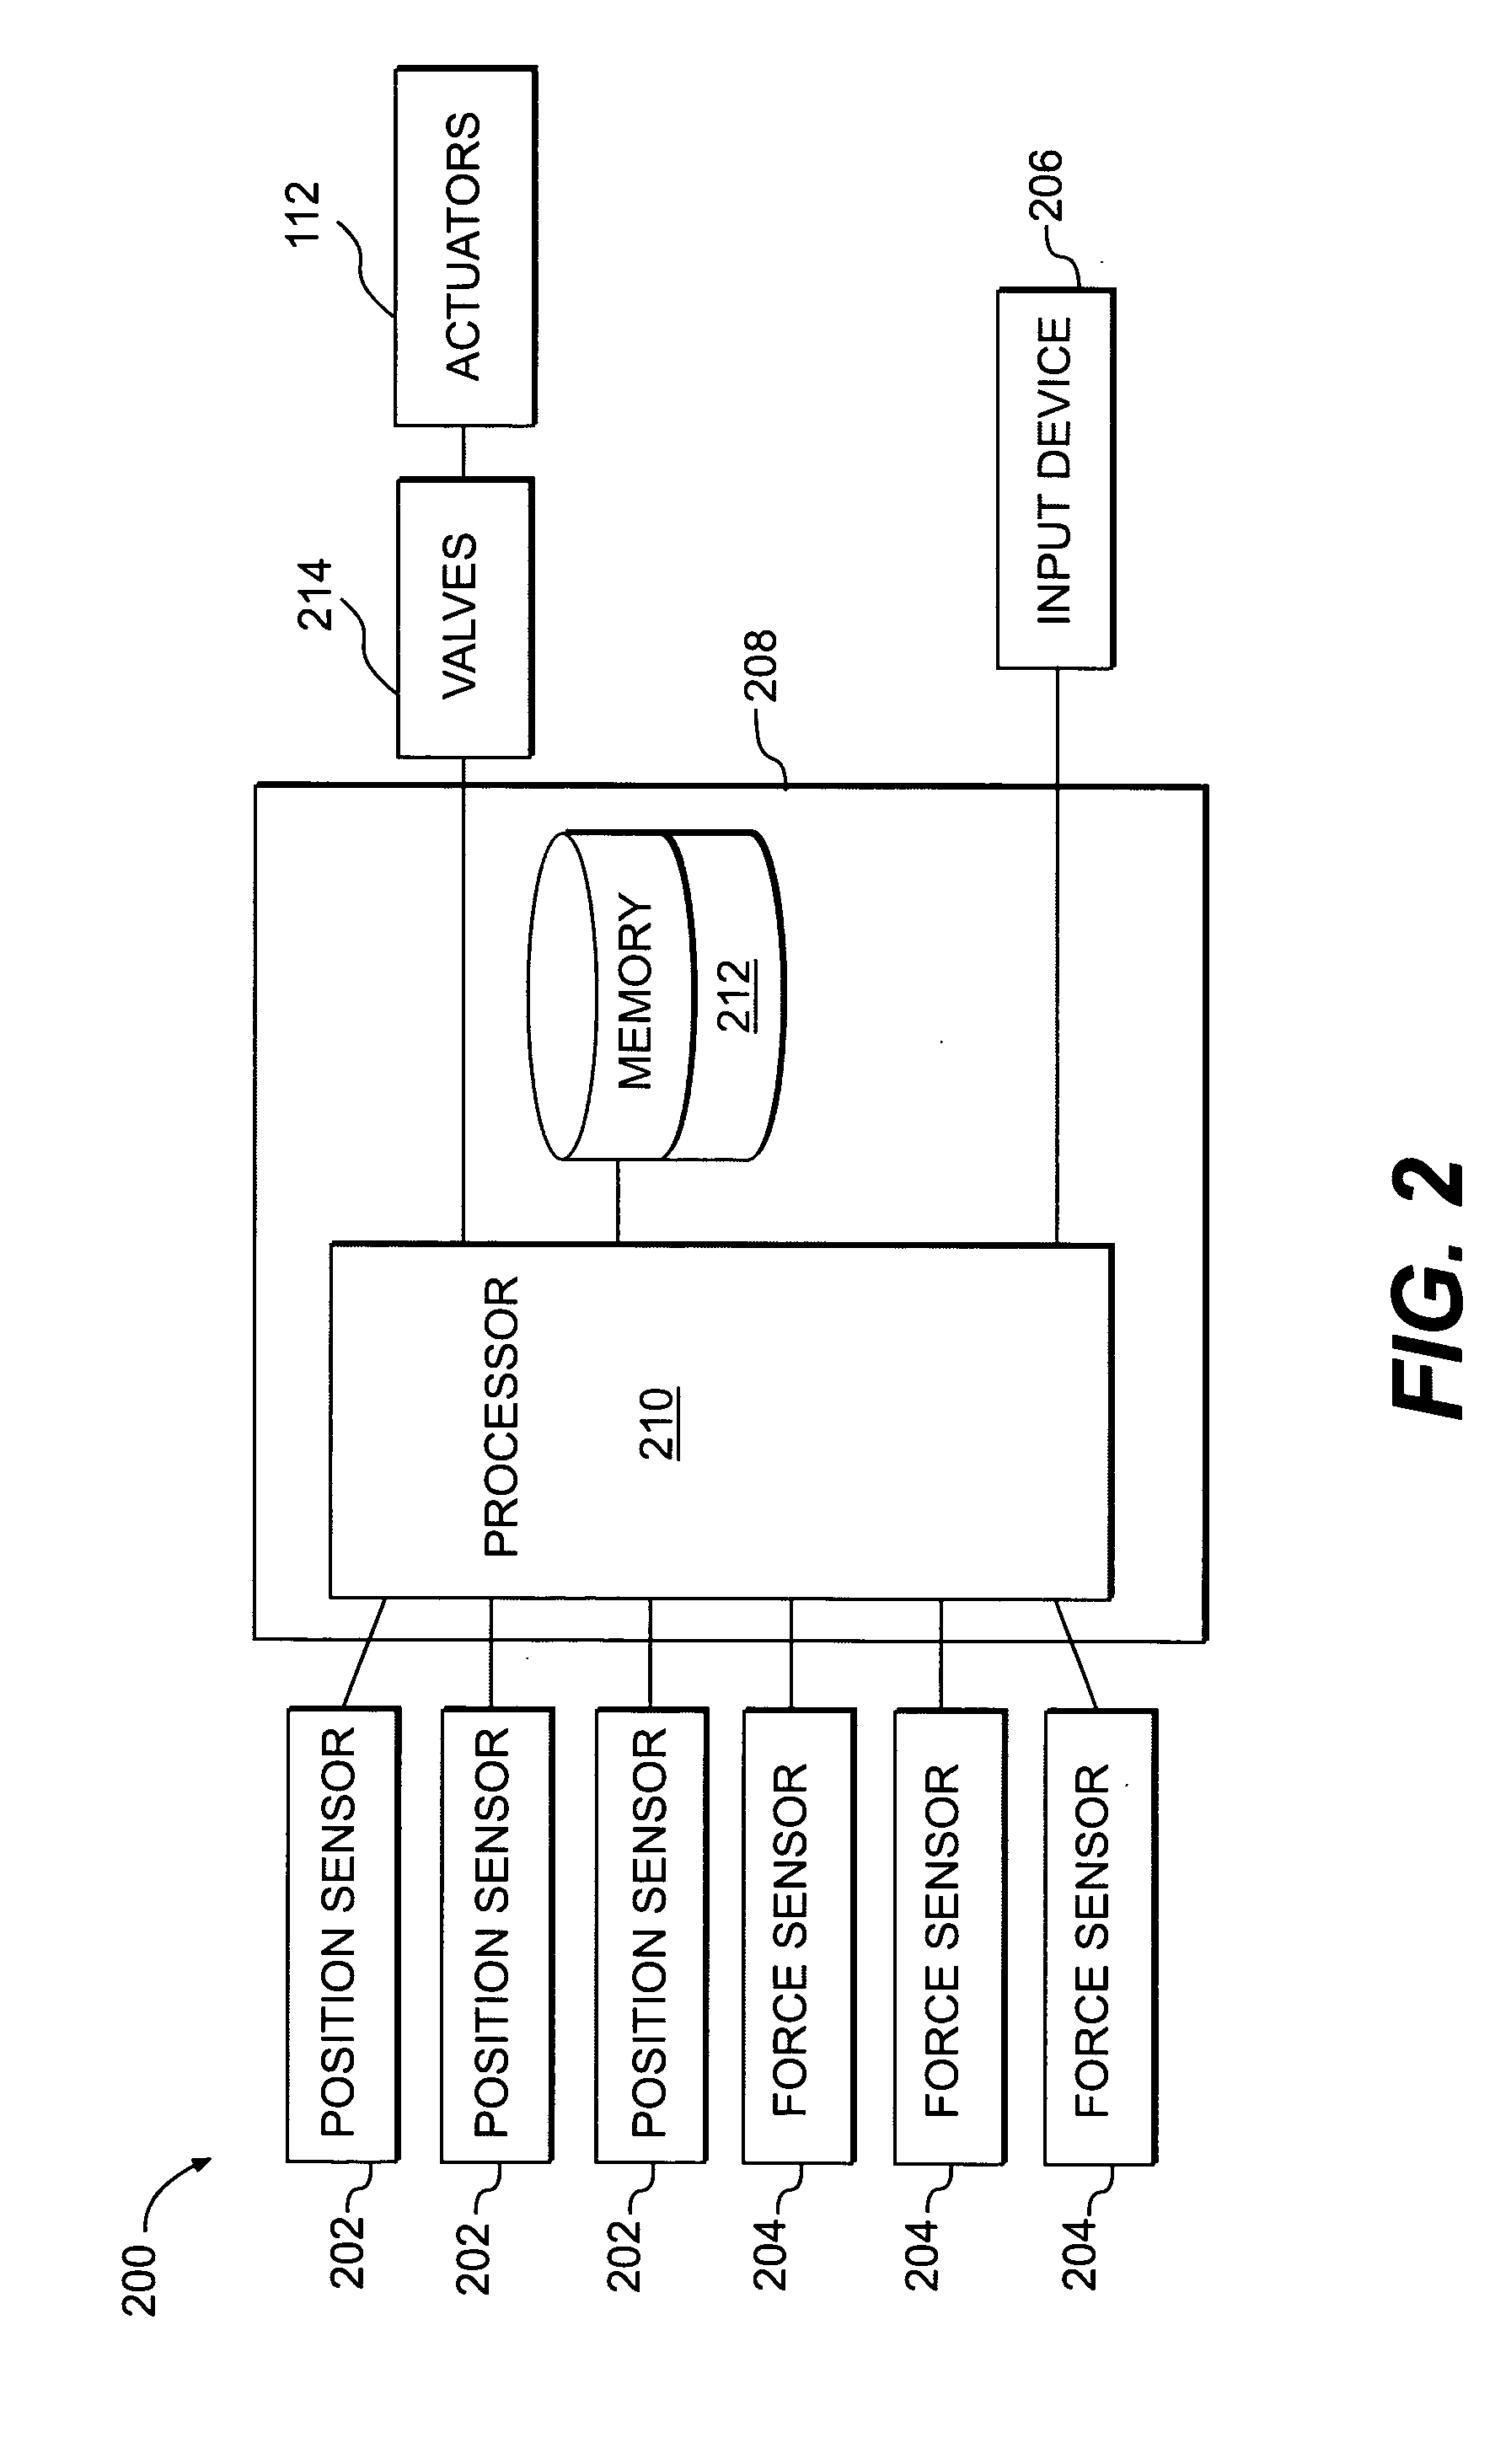 Method and system of controlling a work tool